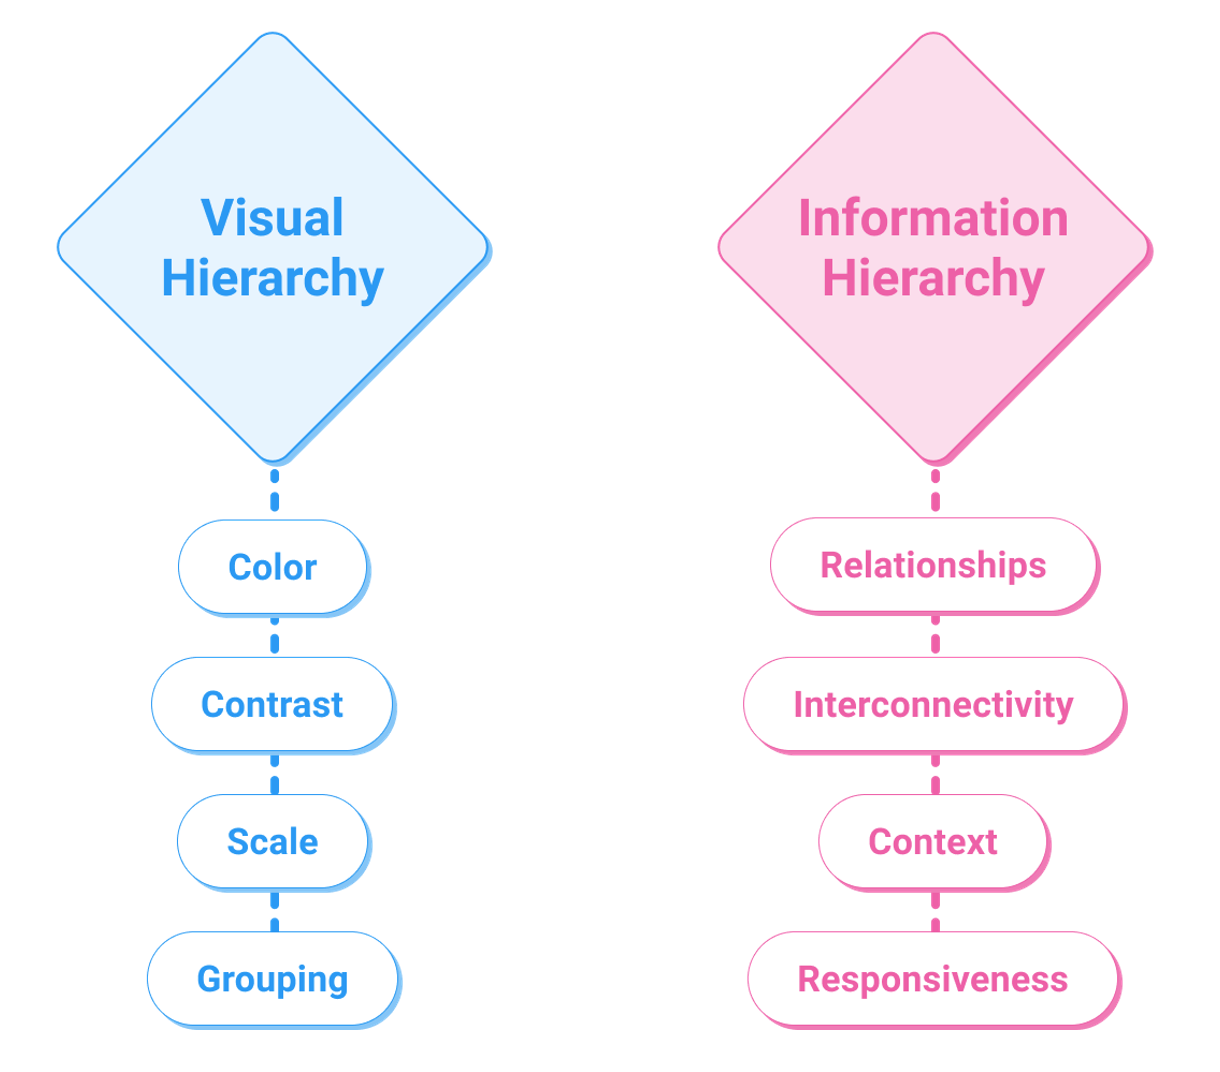 Attributes of visual and information hierarchy